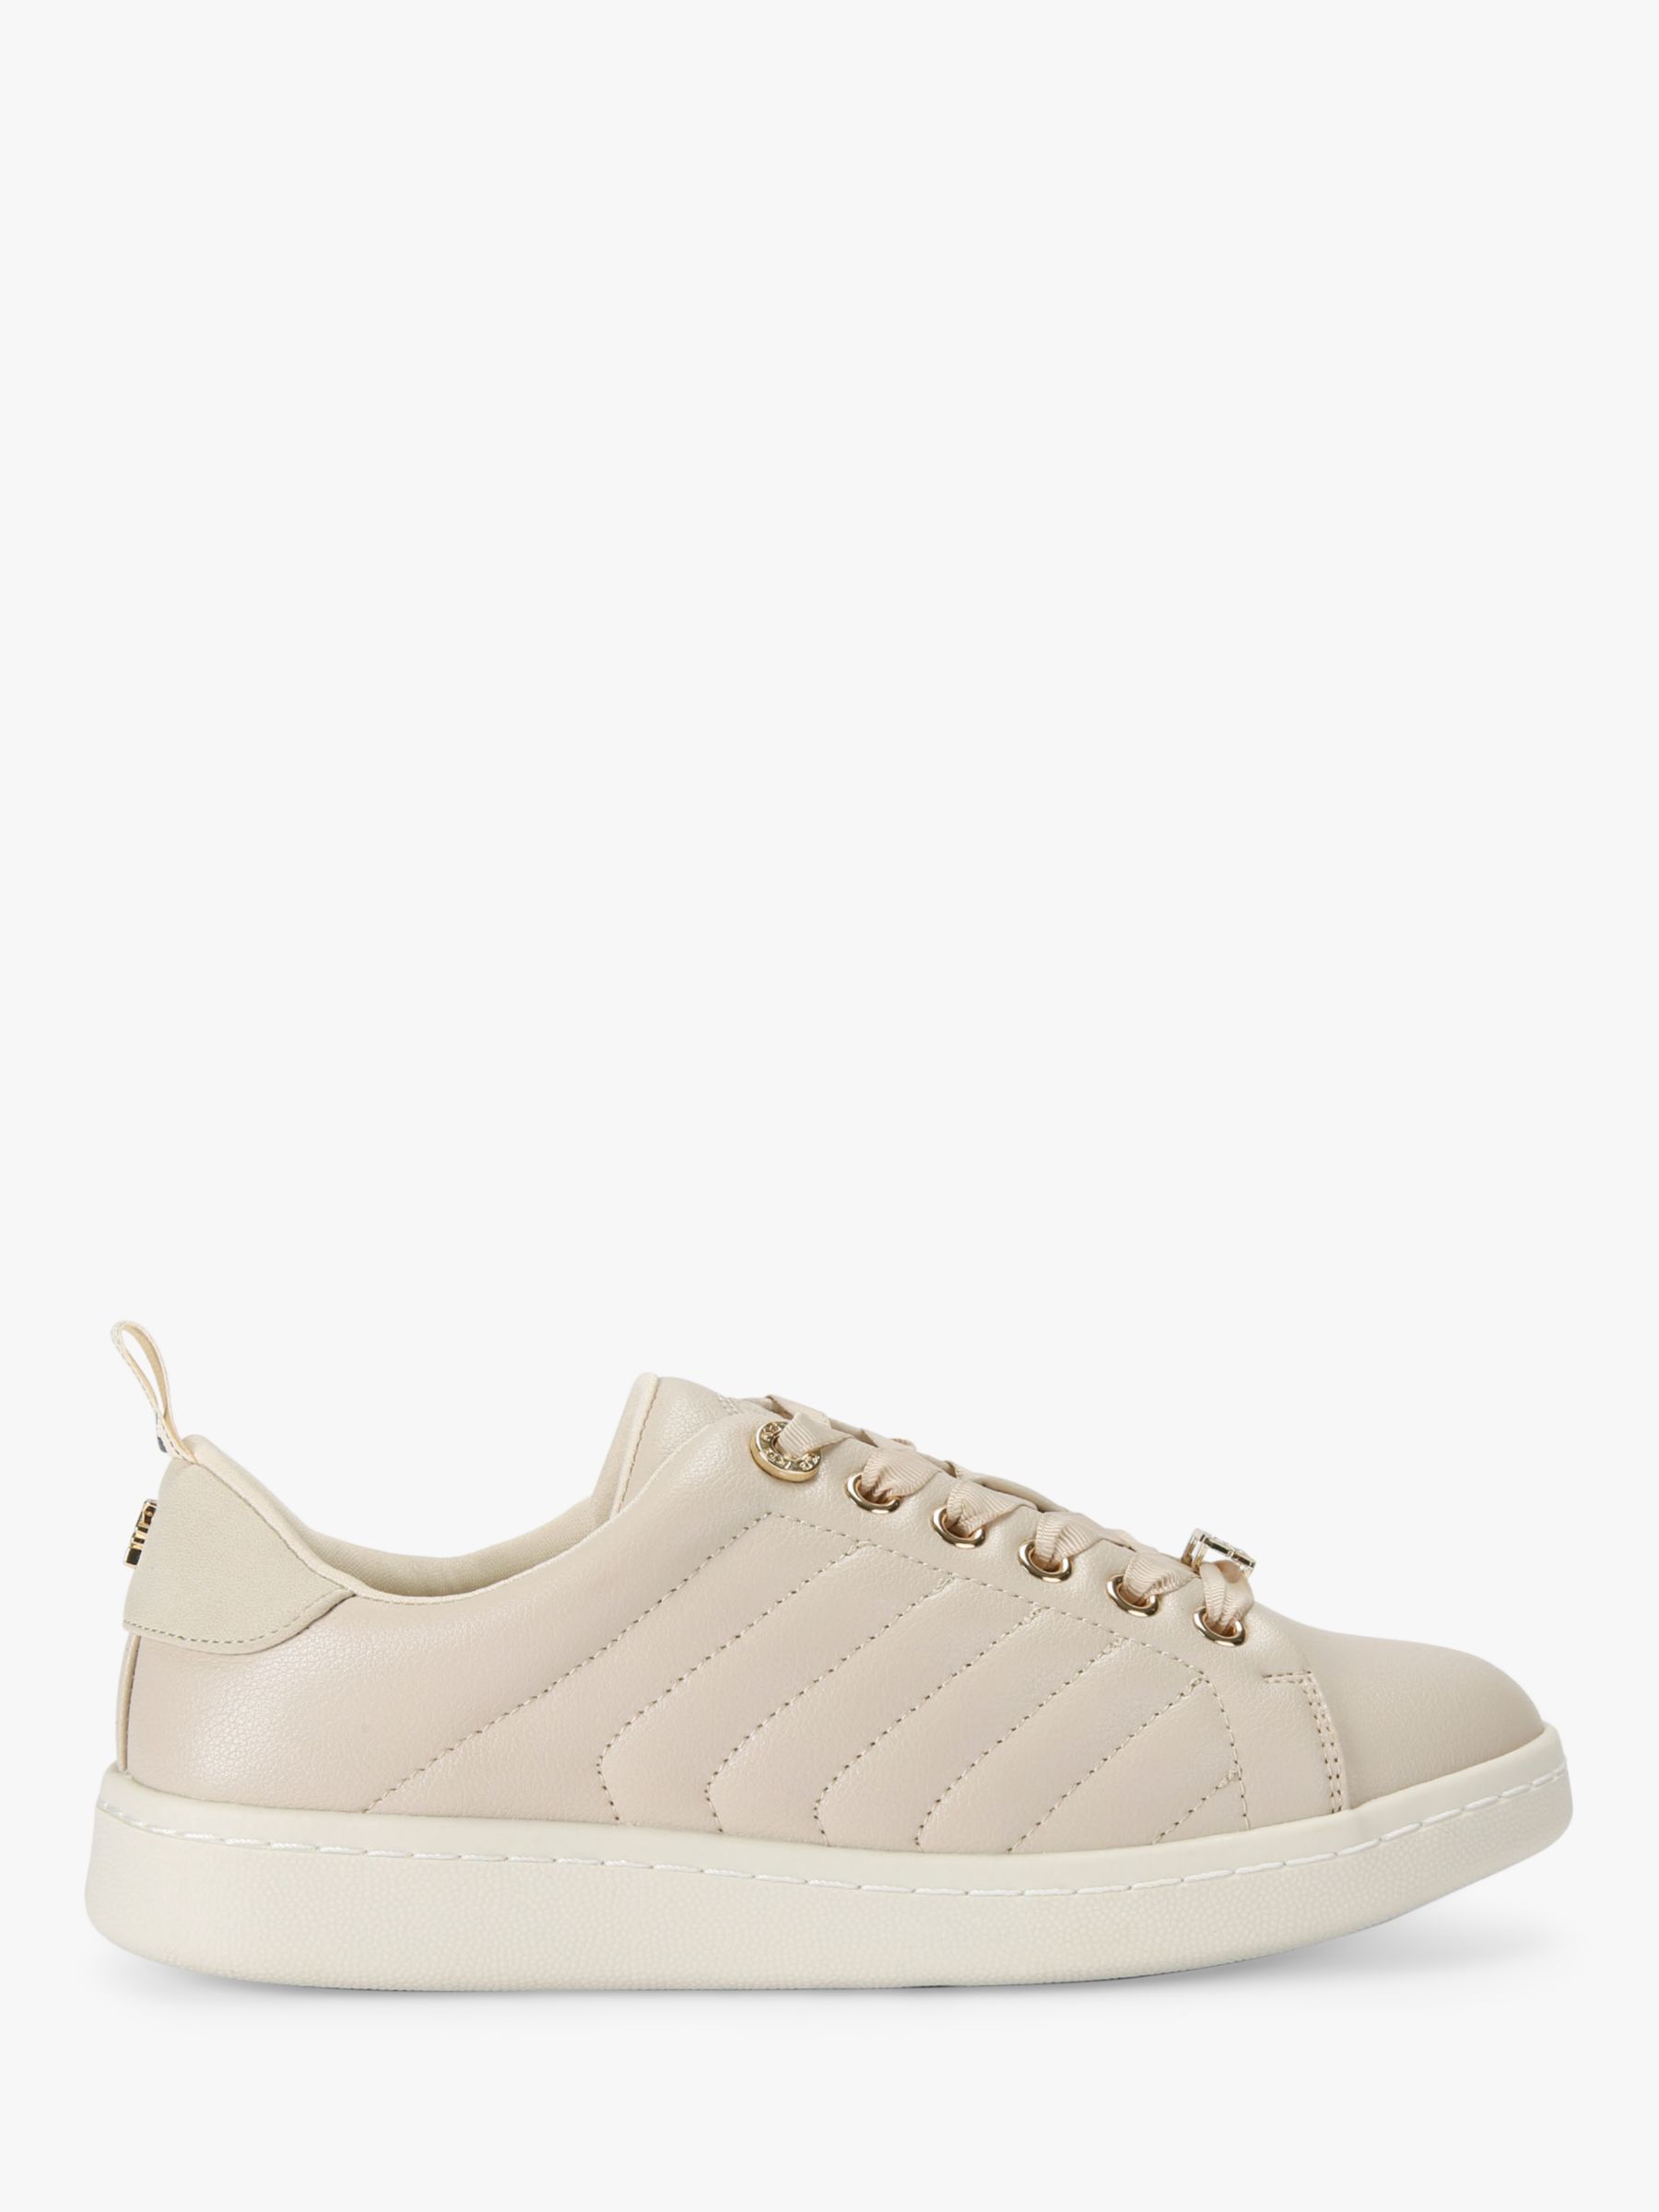 Buy KG Kurt Geiger Liza Quilted Trainers, Blush Online at johnlewis.com